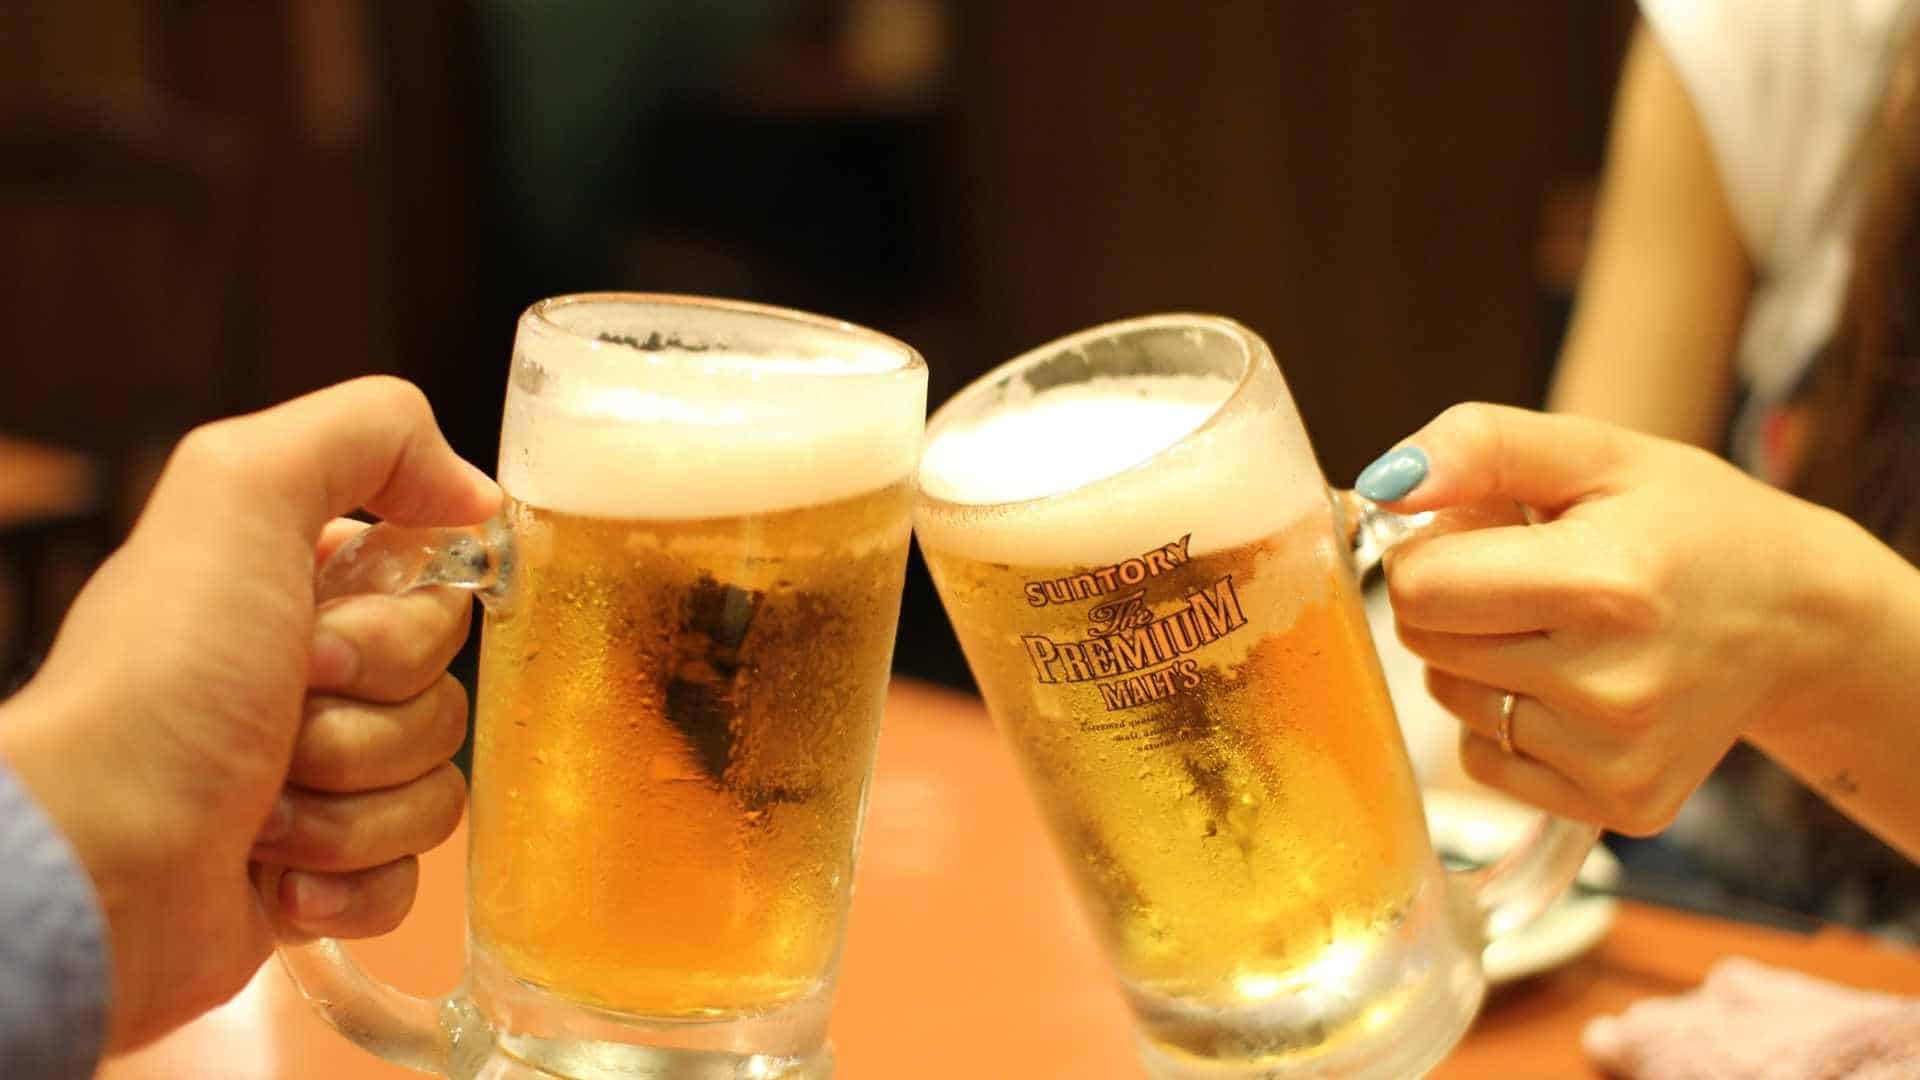 The must-try Classic Japanese Beers and Japanese Craft Beers